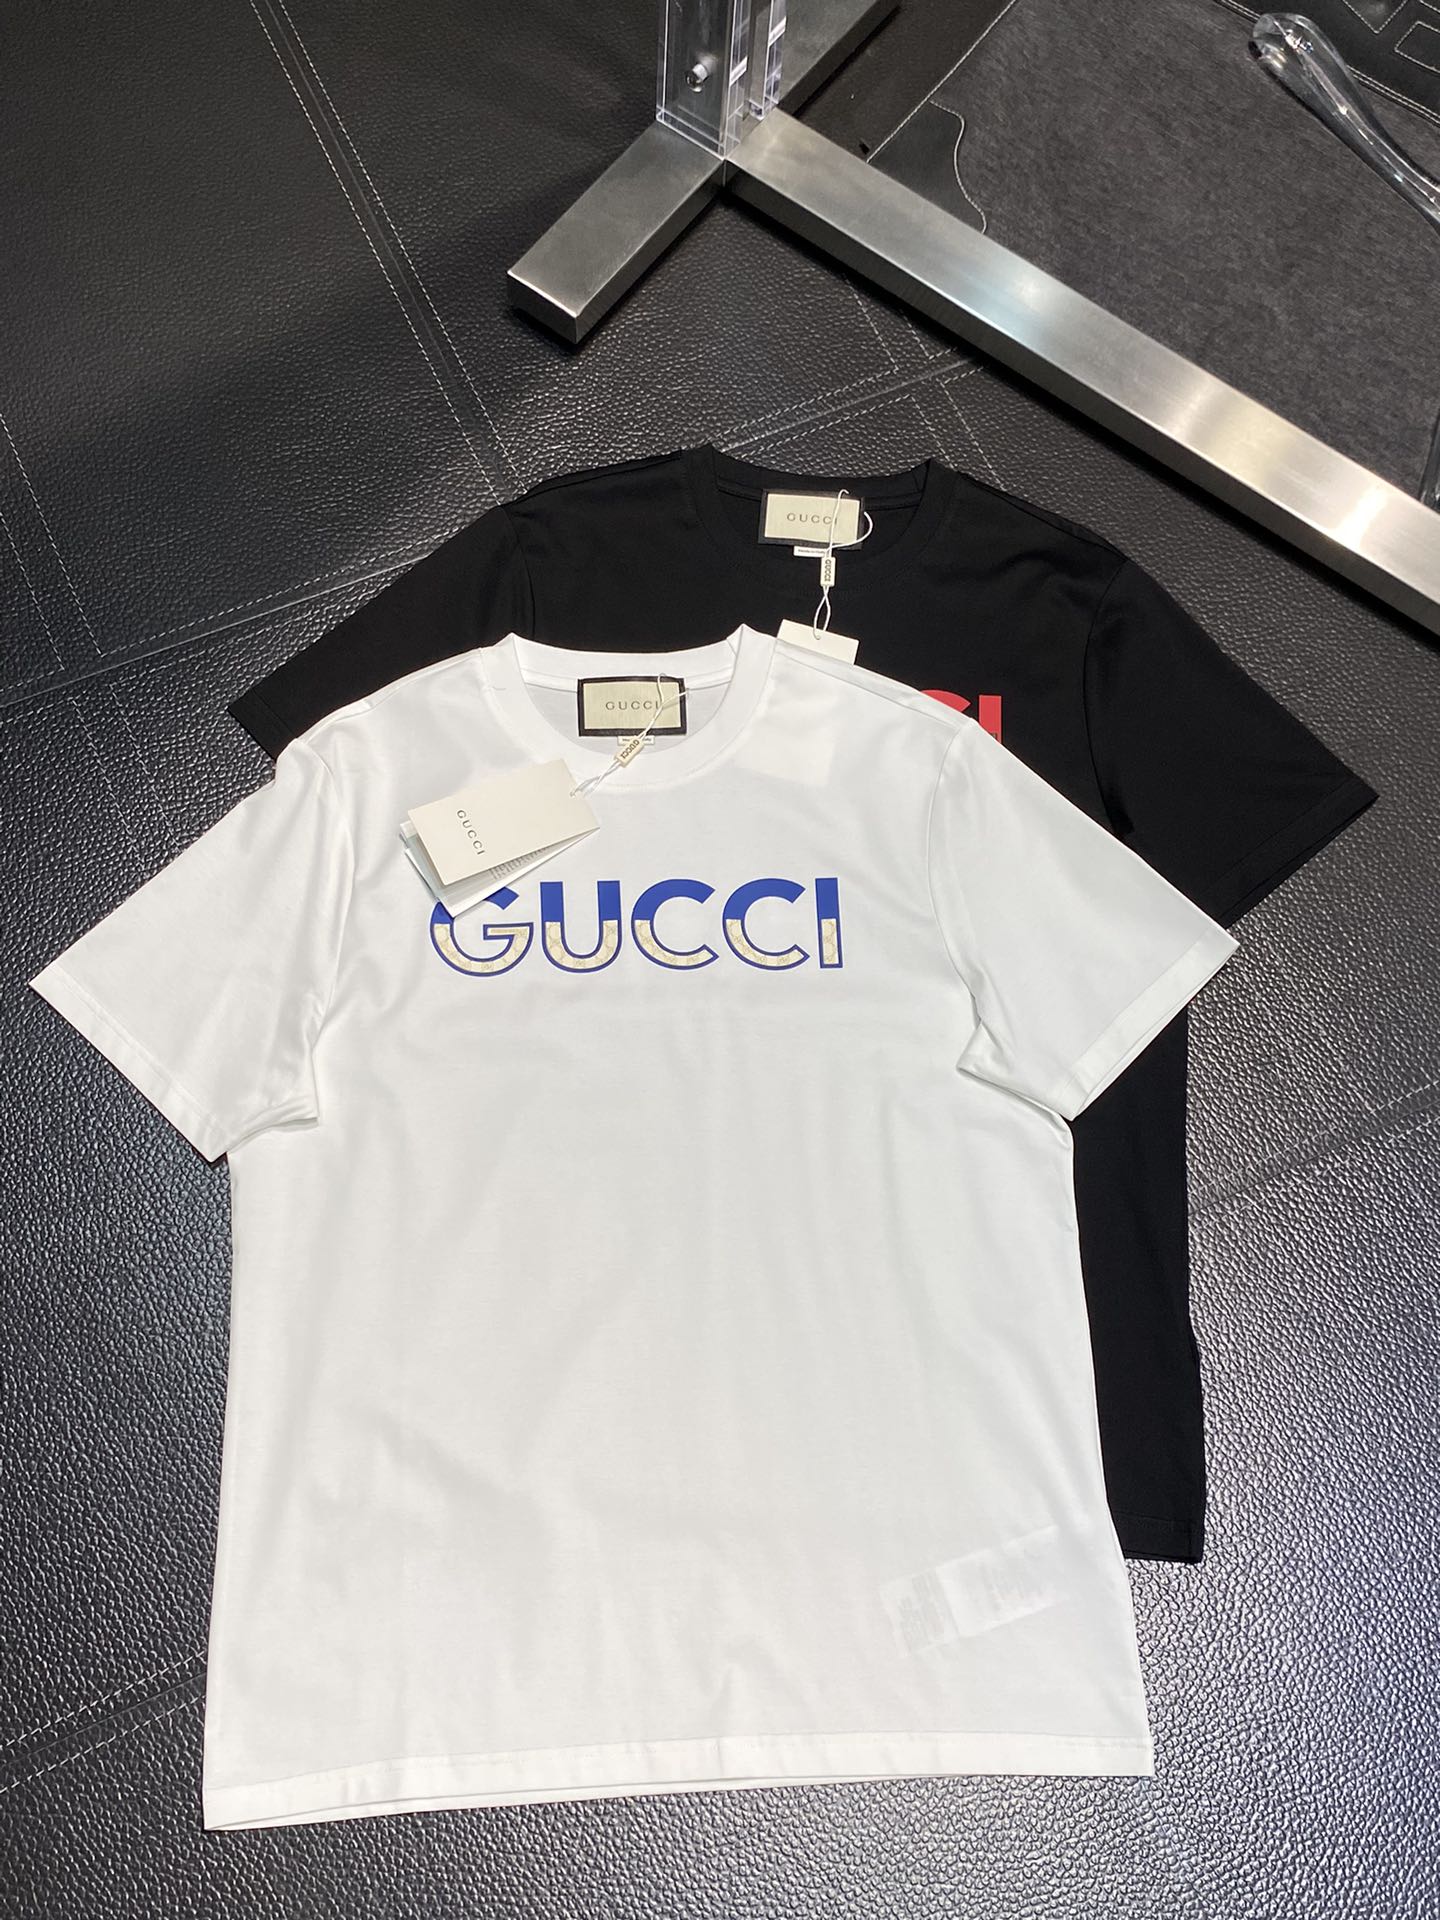 Only sell high-quality
 Gucci Best
 Clothing T-Shirt Men Fashion Short Sleeve